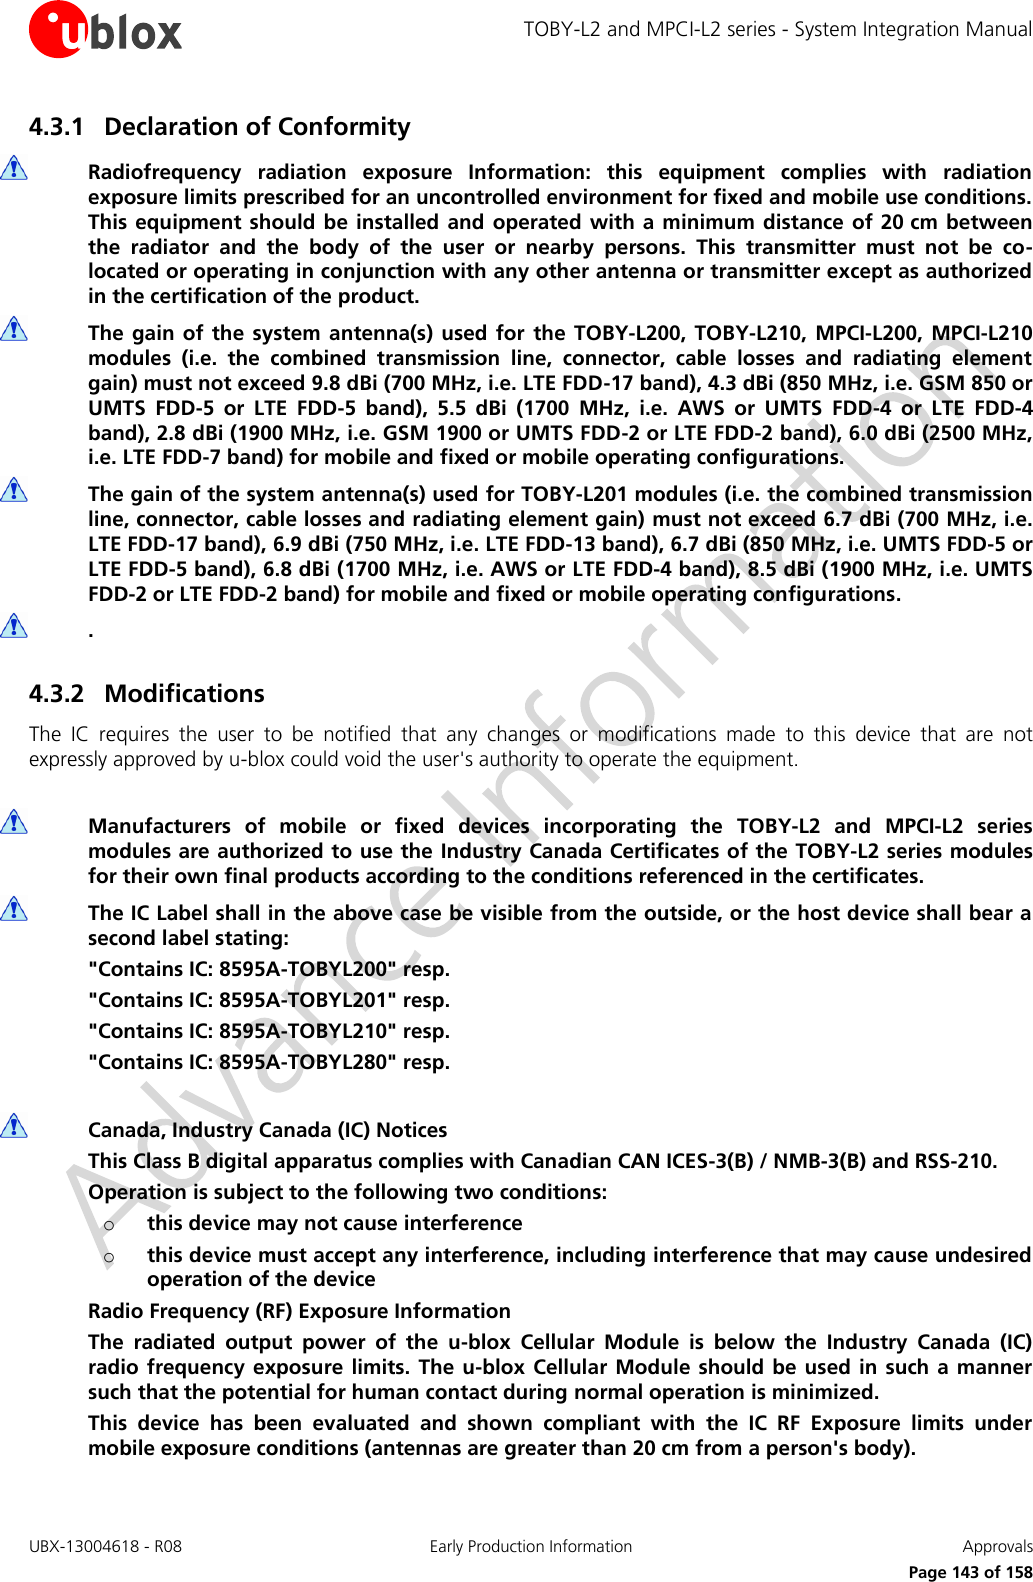 TOBY-L2 and MPCI-L2 series - System Integration Manual UBX-13004618 - R08  Early Production Information  Approvals     Page 143 of 158 4.3.1 Declaration of Conformity   Radiofrequency  radiation  exposure  Information:  this  equipment  complies  with  radiation exposure limits prescribed for an uncontrolled environment for fixed and mobile use conditions. This equipment should be installed  and operated  with a minimum distance  of 20 cm between the  radiator  and  the  body  of  the  user  or  nearby  persons.  This  transmitter  must  not  be  co-located or operating in conjunction with any other antenna or transmitter except as authorized in the certification of the product.  The gain of the  system antenna(s)  used for  the  TOBY-L200,  TOBY-L210,  MPCI-L200,  MPCI-L210 modules  (i.e.  the  combined  transmission  line,  connector,  cable  losses  and  radiating  element gain) must not exceed 9.8 dBi (700 MHz, i.e. LTE FDD-17 band), 4.3 dBi (850 MHz, i.e. GSM 850 or UMTS  FDD-5  or  LTE  FDD-5  band),  5.5  dBi  (1700  MHz,  i.e.  AWS  or  UMTS  FDD-4  or  LTE  FDD-4 band), 2.8 dBi (1900 MHz, i.e. GSM 1900 or UMTS FDD-2 or LTE FDD-2 band), 6.0 dBi (2500 MHz, i.e. LTE FDD-7 band) for mobile and fixed or mobile operating configurations.  The gain of the system antenna(s) used for TOBY-L201 modules (i.e. the combined transmission line, connector, cable losses and radiating element gain) must not exceed 6.7 dBi (700 MHz, i.e. LTE FDD-17 band), 6.9 dBi (750 MHz, i.e. LTE FDD-13 band), 6.7 dBi (850 MHz, i.e. UMTS FDD-5 or LTE FDD-5 band), 6.8 dBi (1700 MHz, i.e. AWS or LTE FDD-4 band), 8.5 dBi (1900 MHz, i.e. UMTS FDD-2 or LTE FDD-2 band) for mobile and fixed or mobile operating configurations.  .  4.3.2 Modifications The  IC  requires  the  user  to  be  notified  that  any  changes  or  modifications  made  to  this  device  that  are  not expressly approved by u-blox could void the user&apos;s authority to operate the equipment.   Manufacturers  of  mobile  or  fixed  devices  incorporating  the  TOBY-L2  and  MPCI-L2  series modules are authorized to use the Industry Canada Certificates of the TOBY-L2 series modules for their own final products according to the conditions referenced in the certificates.  The IC Label shall in the above case be visible from the outside, or the host device shall bear a second label stating: &quot;Contains IC: 8595A-TOBYL200&quot; resp. &quot;Contains IC: 8595A-TOBYL201&quot; resp. &quot;Contains IC: 8595A-TOBYL210&quot; resp. &quot;Contains IC: 8595A-TOBYL280&quot; resp.   Canada, Industry Canada (IC) Notices This Class B digital apparatus complies with Canadian CAN ICES-3(B) / NMB-3(B) and RSS-210. Operation is subject to the following two conditions: o this device may not cause interference o this device must accept any interference, including interference that may cause undesired operation of the device Radio Frequency (RF) Exposure Information The  radiated  output  power  of  the  u-blox  Cellular  Module  is  below  the  Industry  Canada  (IC) radio frequency exposure limits. The  u-blox  Cellular Module should be used in such a  manner such that the potential for human contact during normal operation is minimized. This  device  has  been  evaluated  and  shown  compliant  with  the  IC  RF  Exposure  limits  under mobile exposure conditions (antennas are greater than 20 cm from a person&apos;s body). 